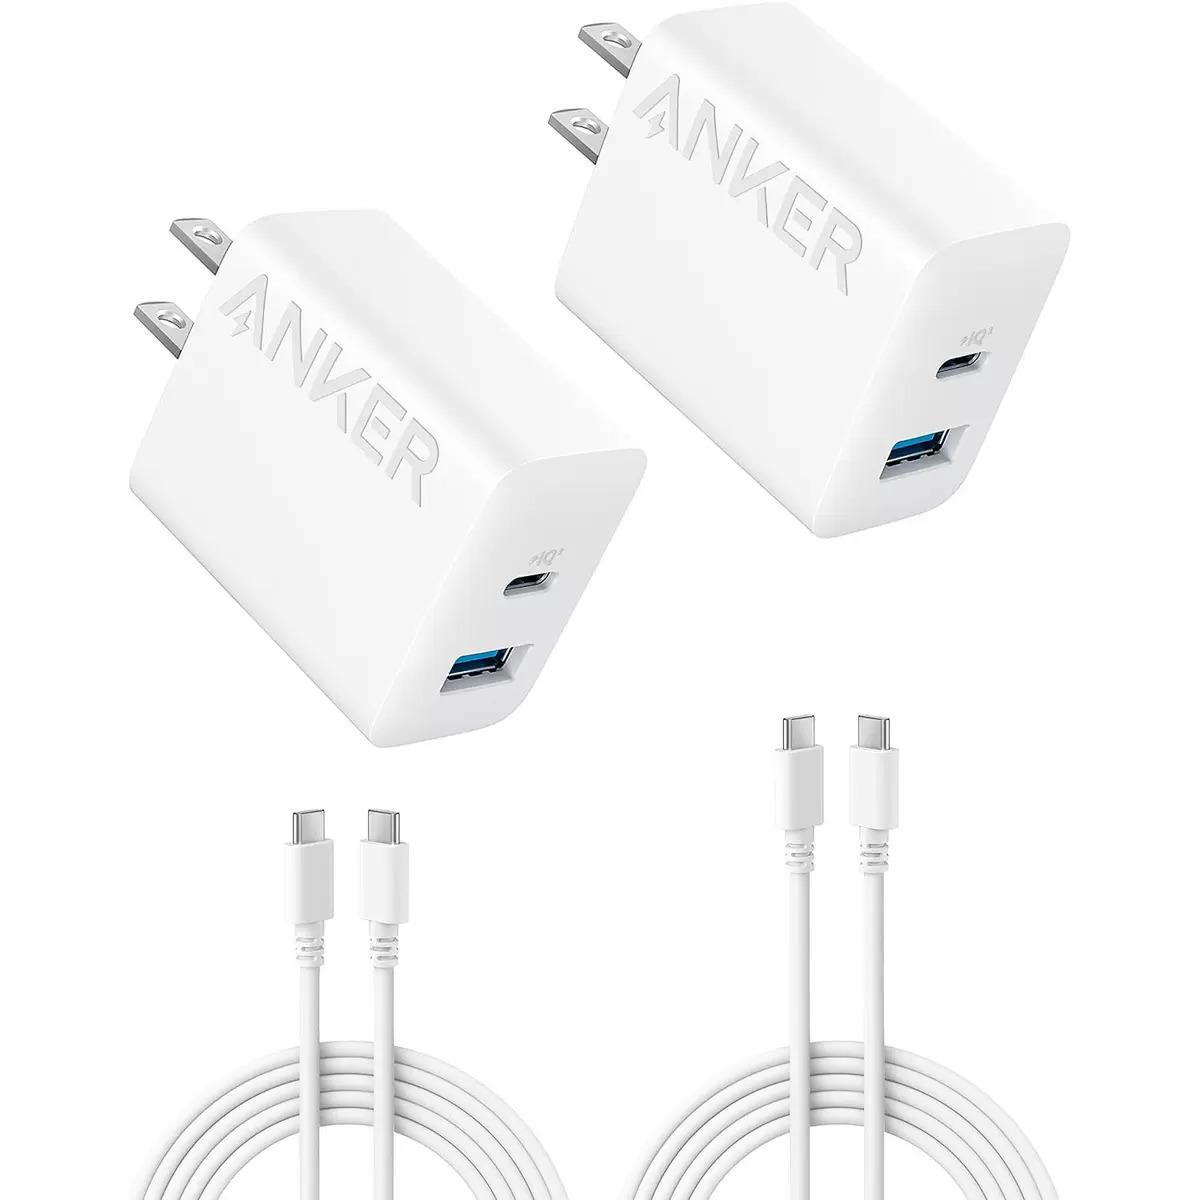 Anker 20W 2-Port USB Type-C and Type-A Wall Charger 2 Pack for $12.99